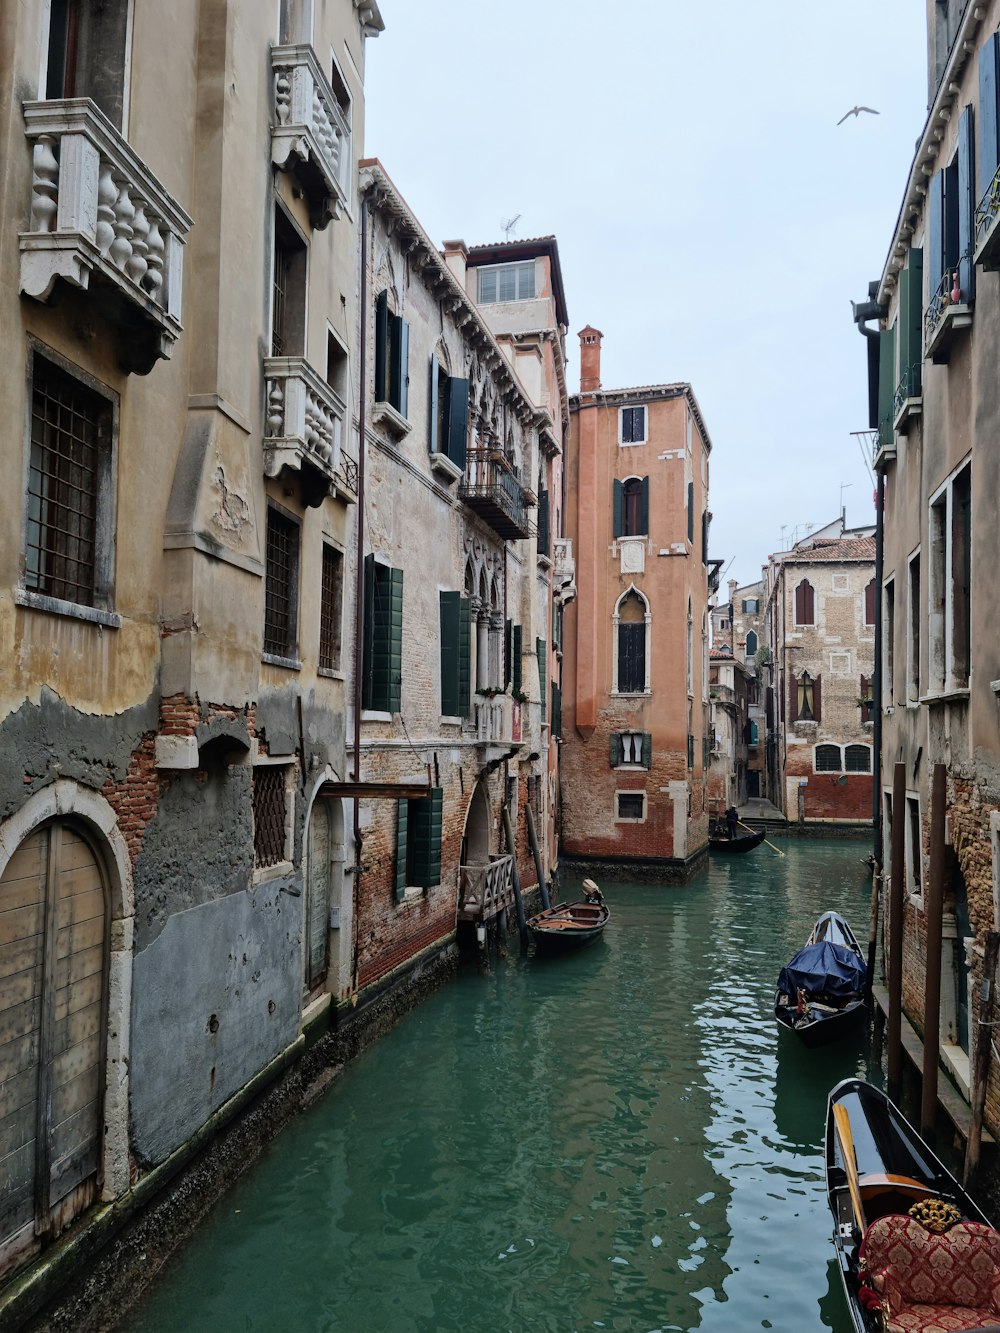 a narrow canal in a city filled with buildings